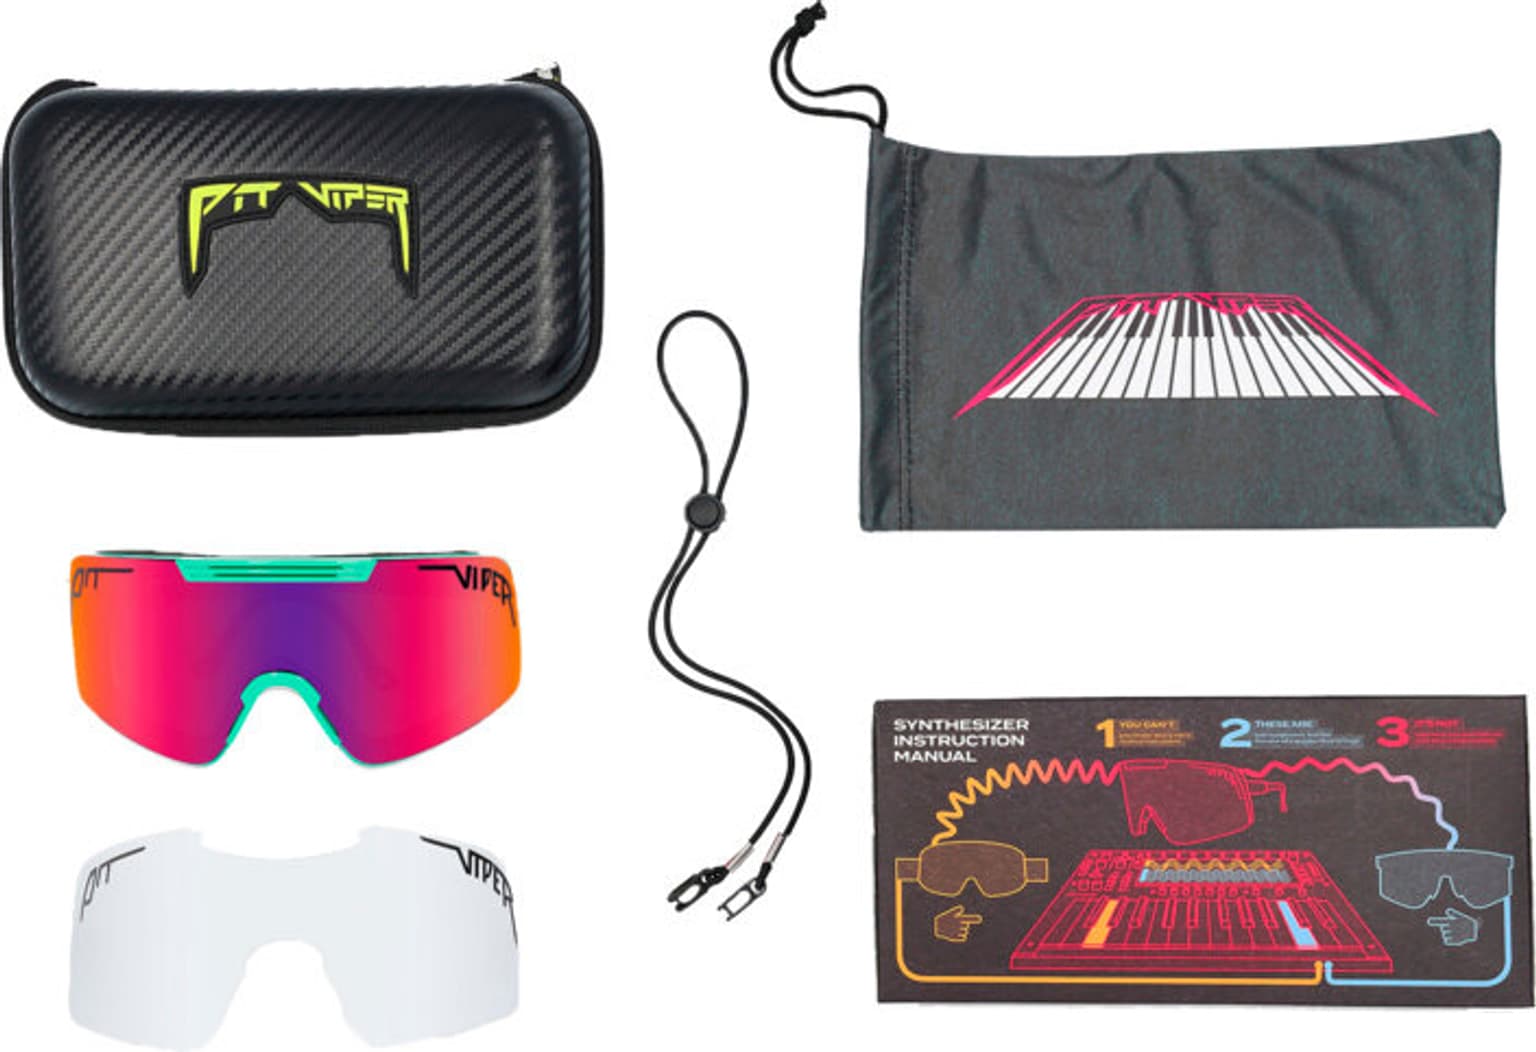 Pit Viper Pit Viper The Synthesizer The Shabooms Sportbrille 3